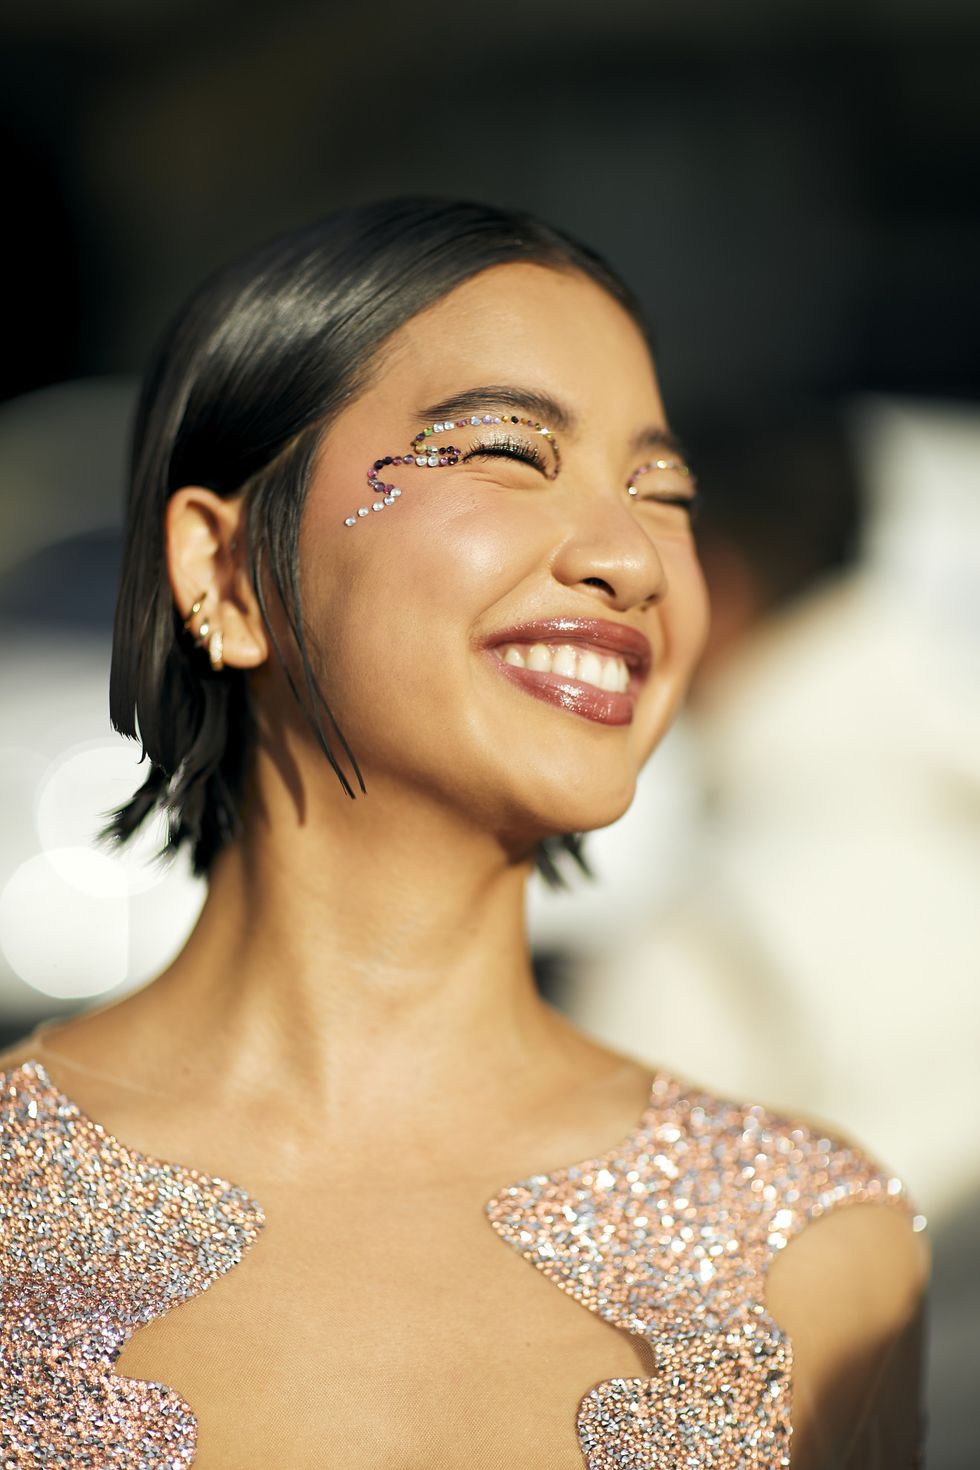 a woman with a tattoo on her face